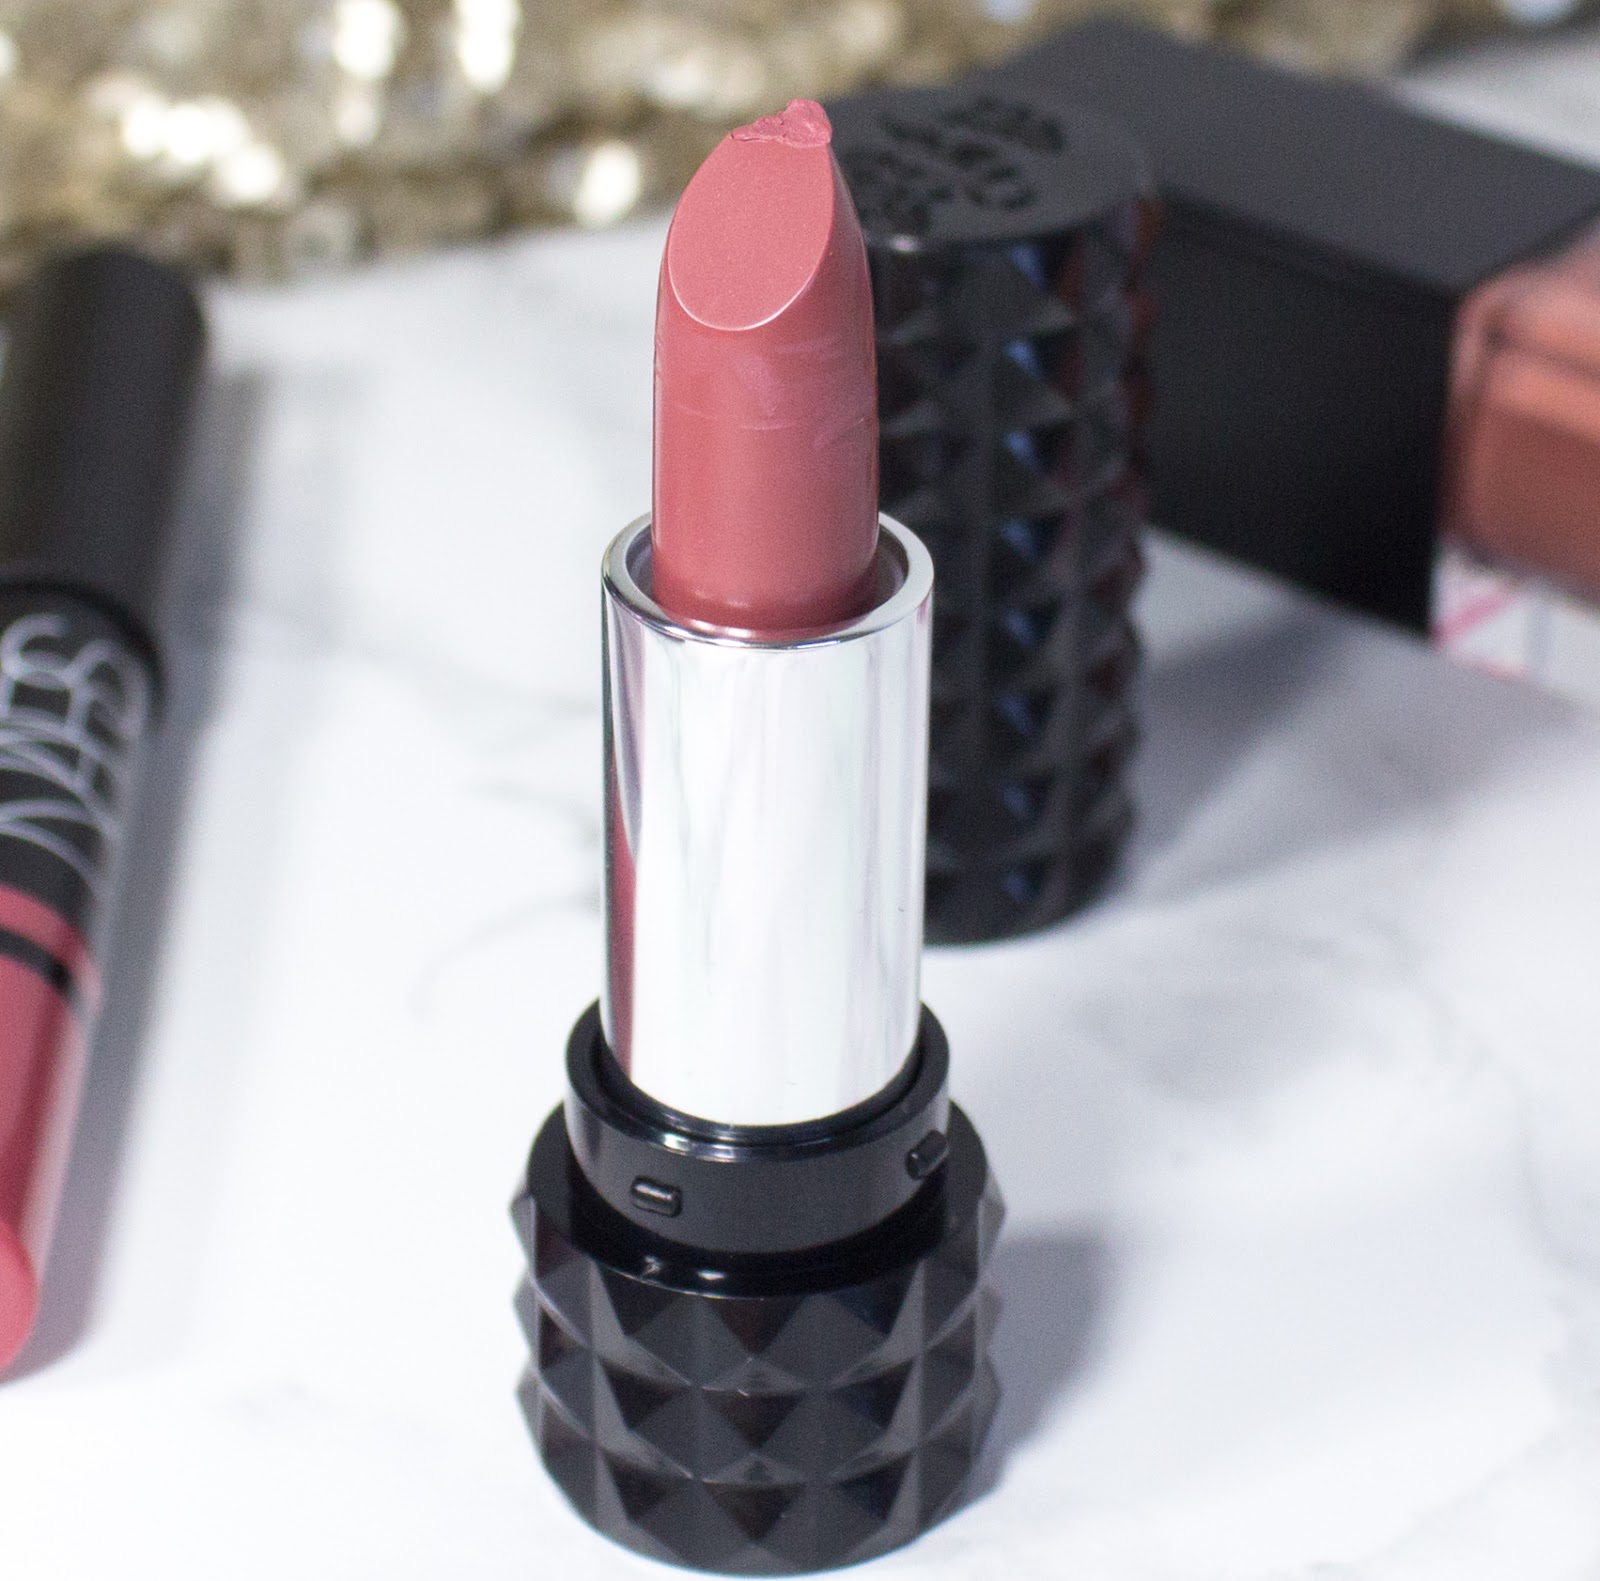 Kat Von D Studded Kiss Lipstick in Lovecraft - Swatch and Review - Portrait of